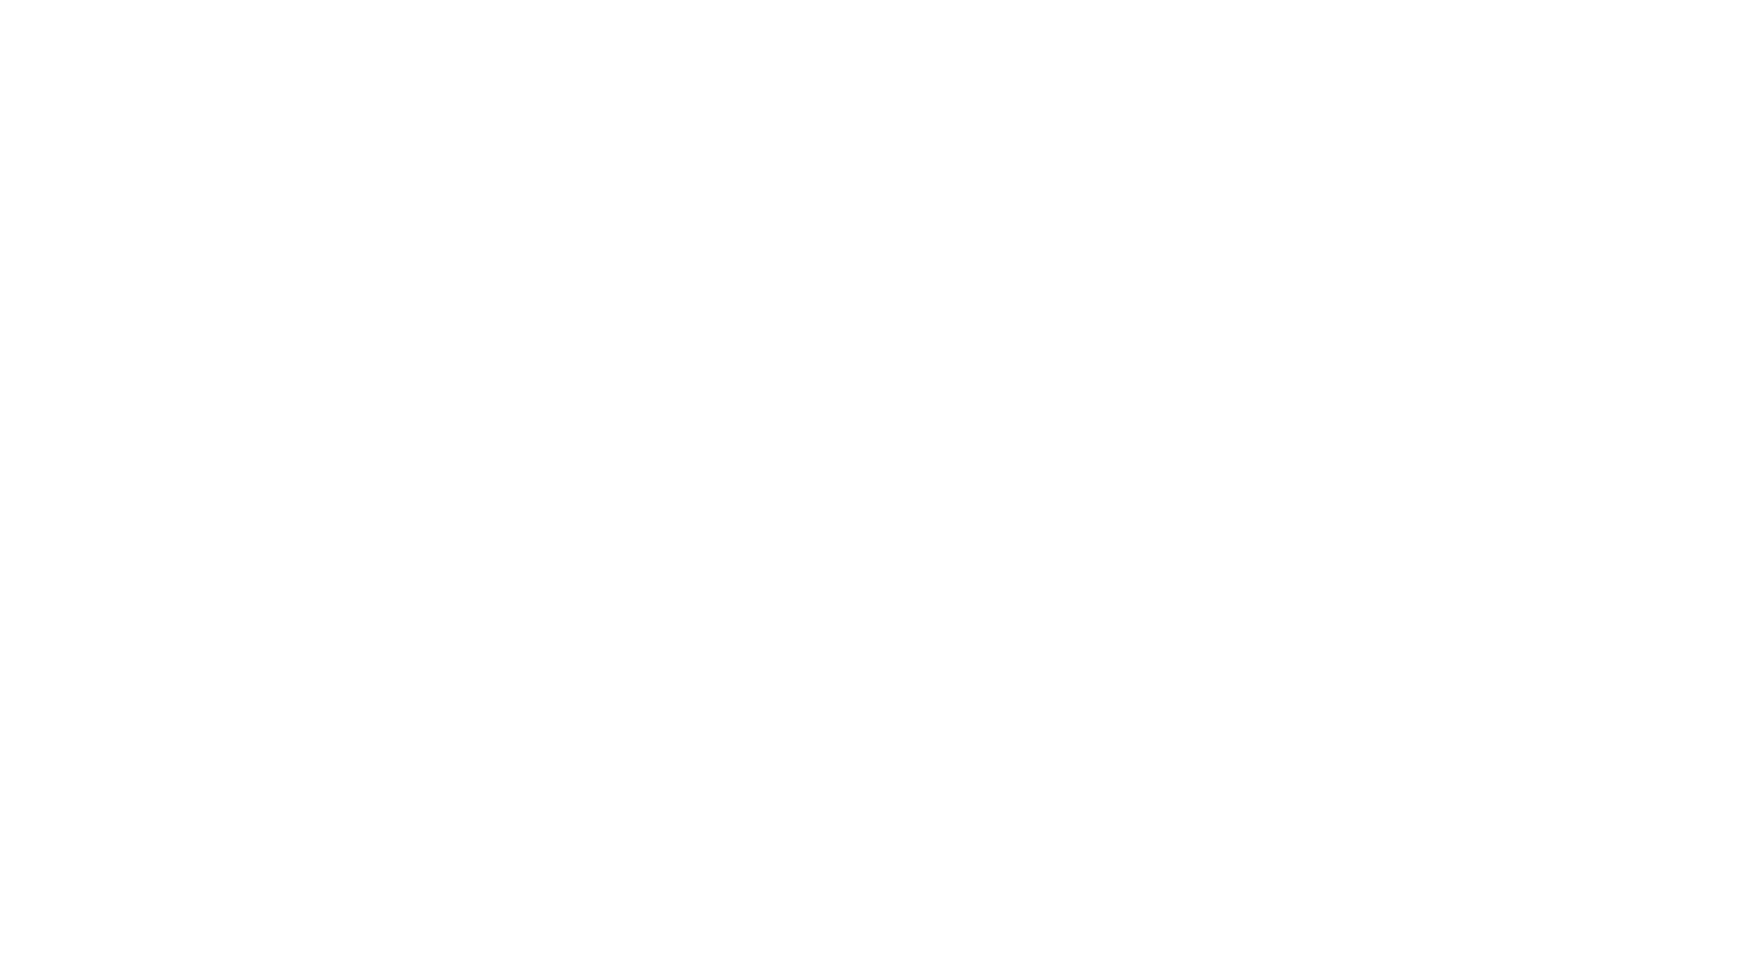 White logo of stylized B-21 with text "Rise of the raider"